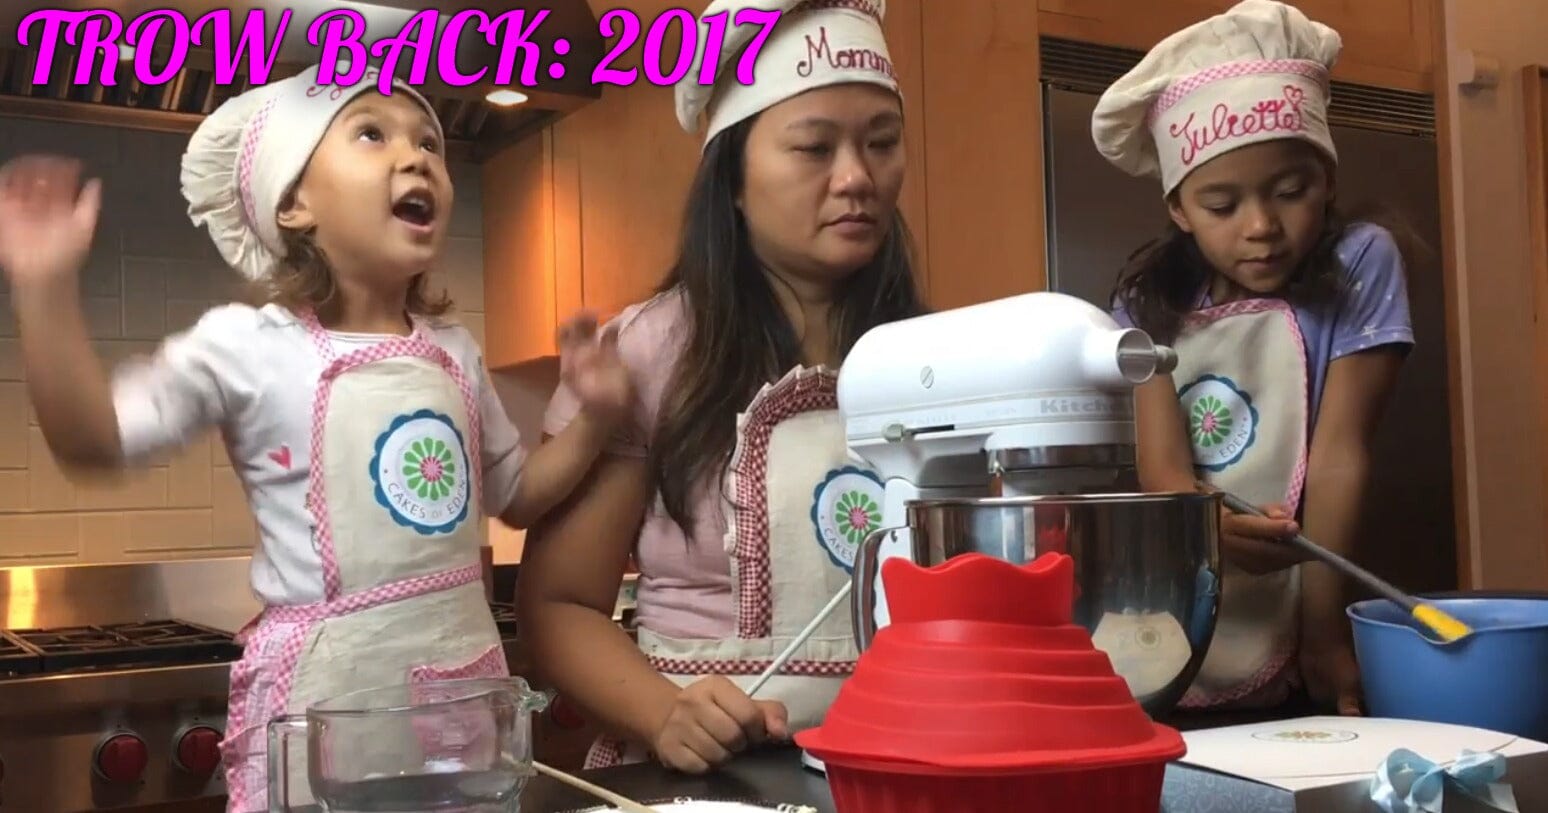 2017 Throwback: Our First Baking Video